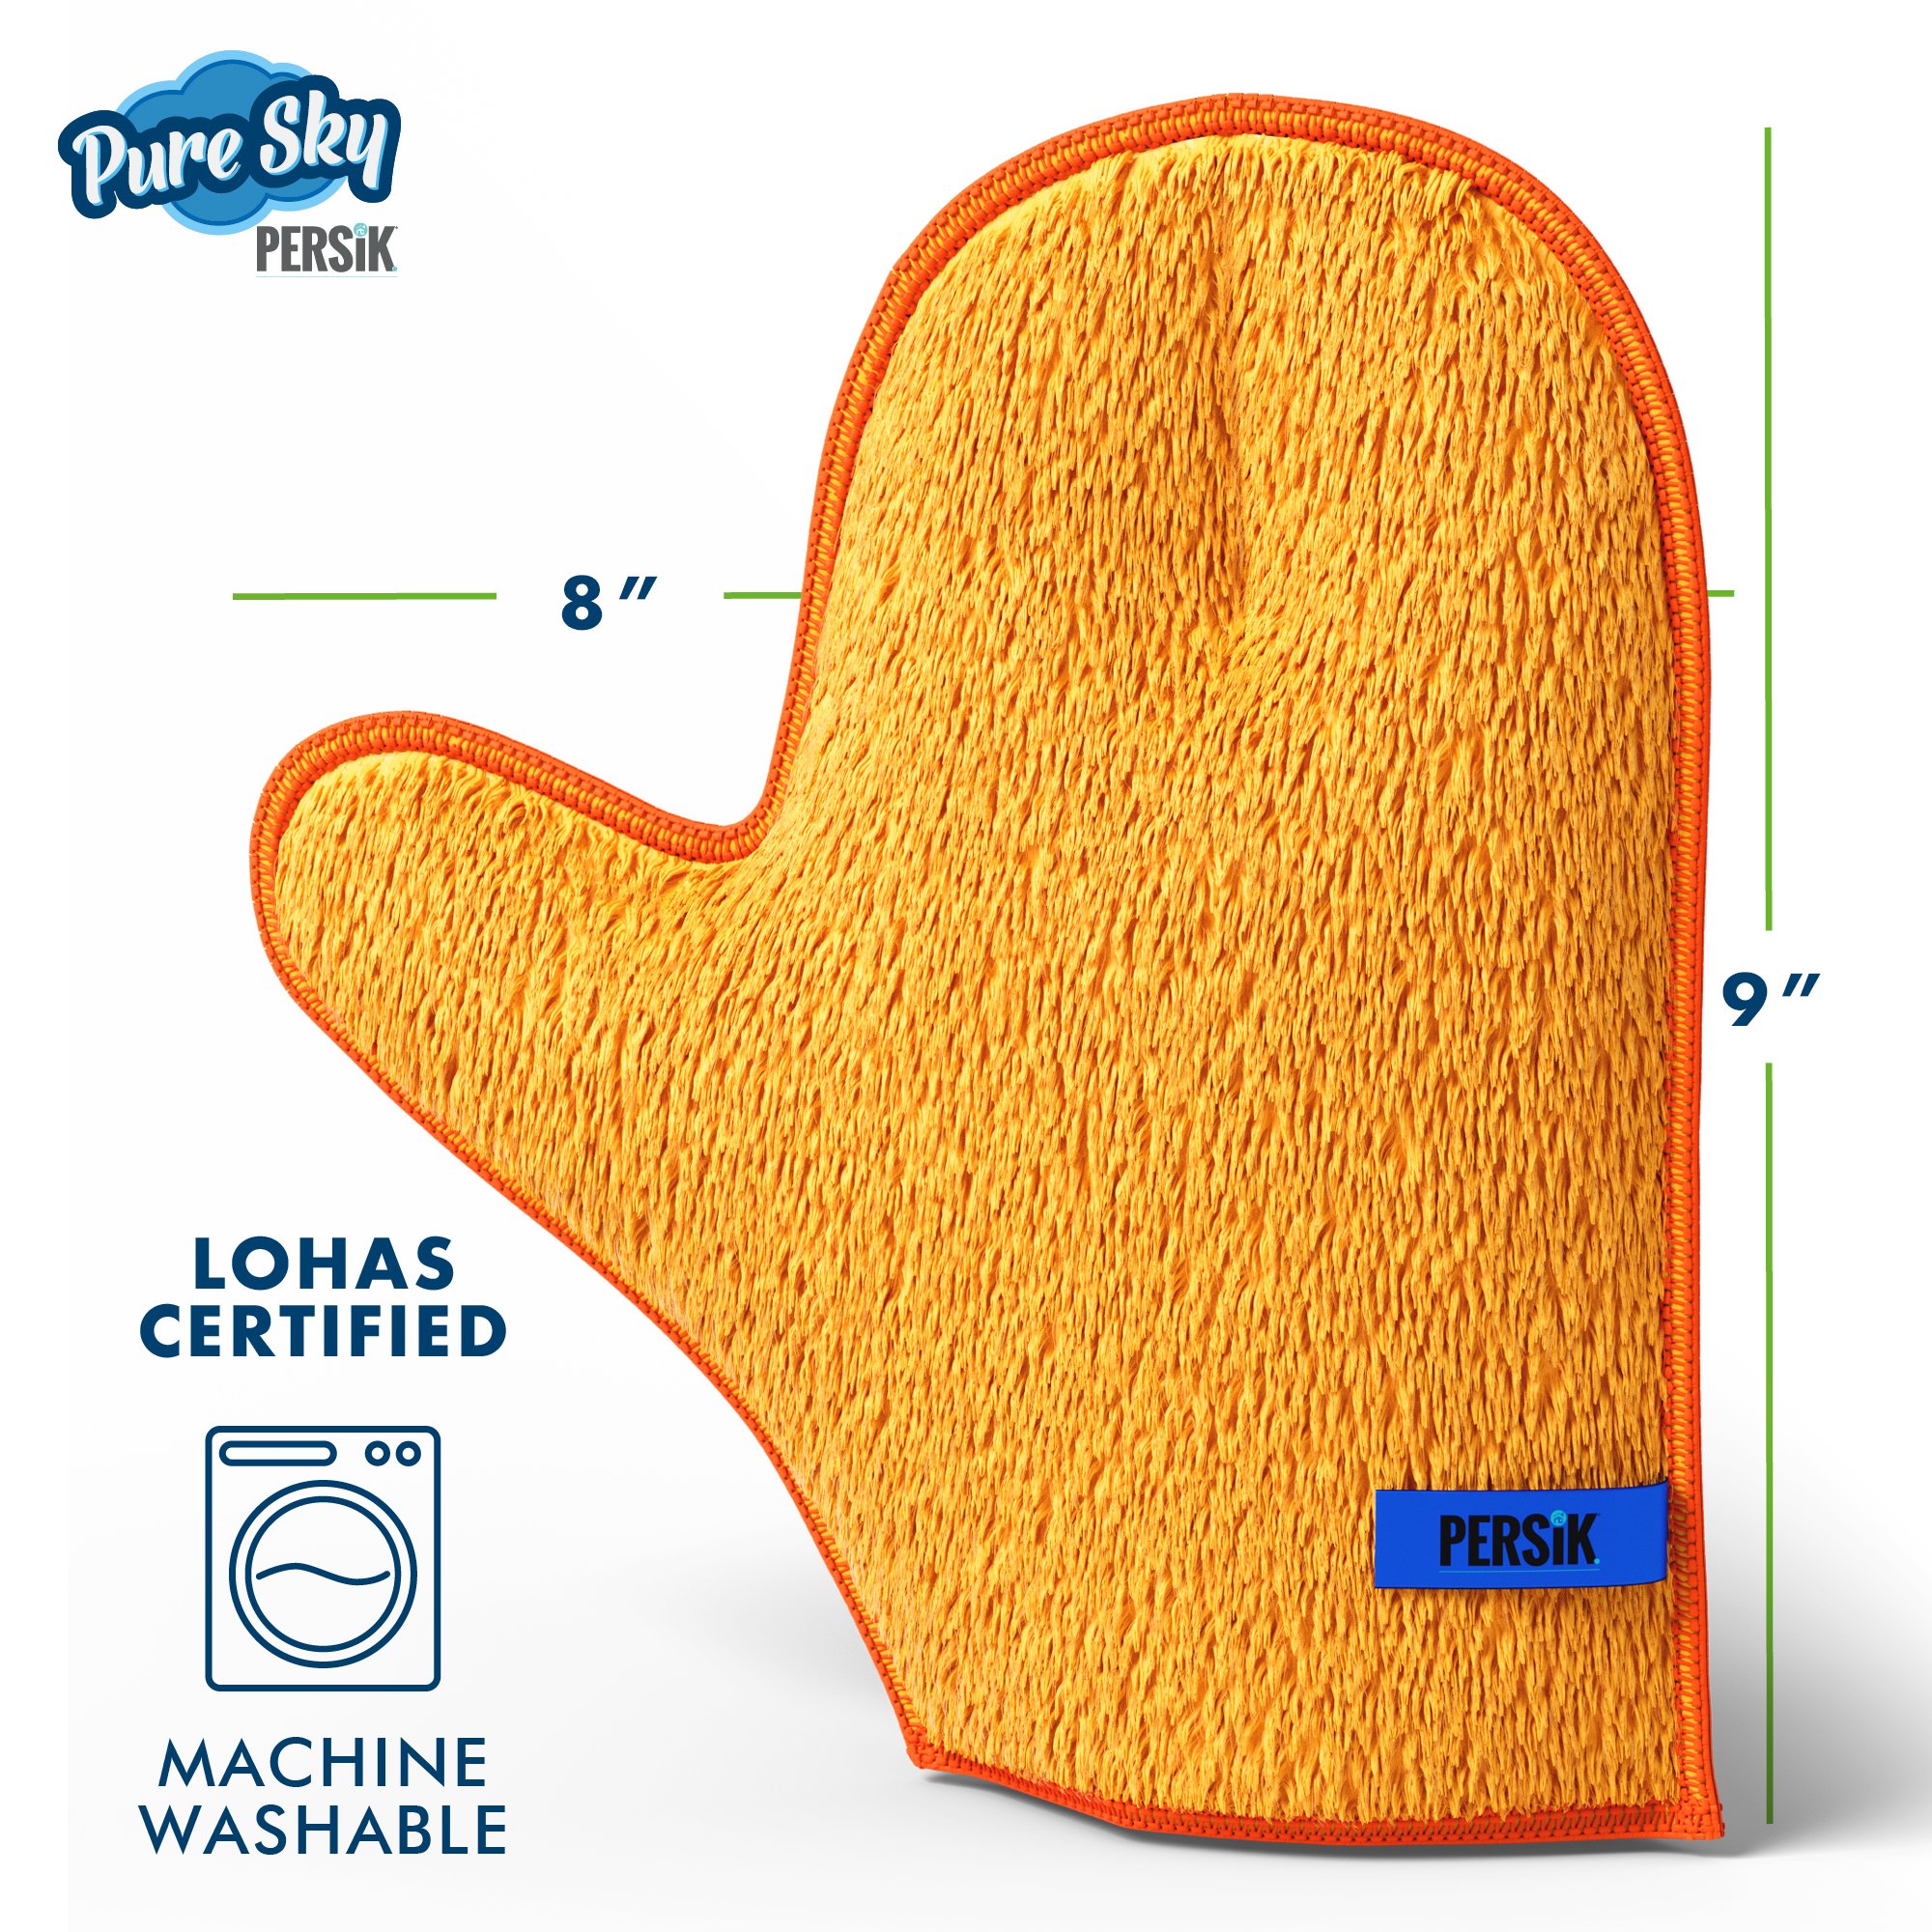 Pure-Sky Magic Microfiber Dusting MITT  Ultra Microfiber Cleaning Cloth Glove  JUST ADD Water No Detergents Needed  Use for Cleaning Furniture, Home Appliances, Screens, Electronics - image 2 of 9